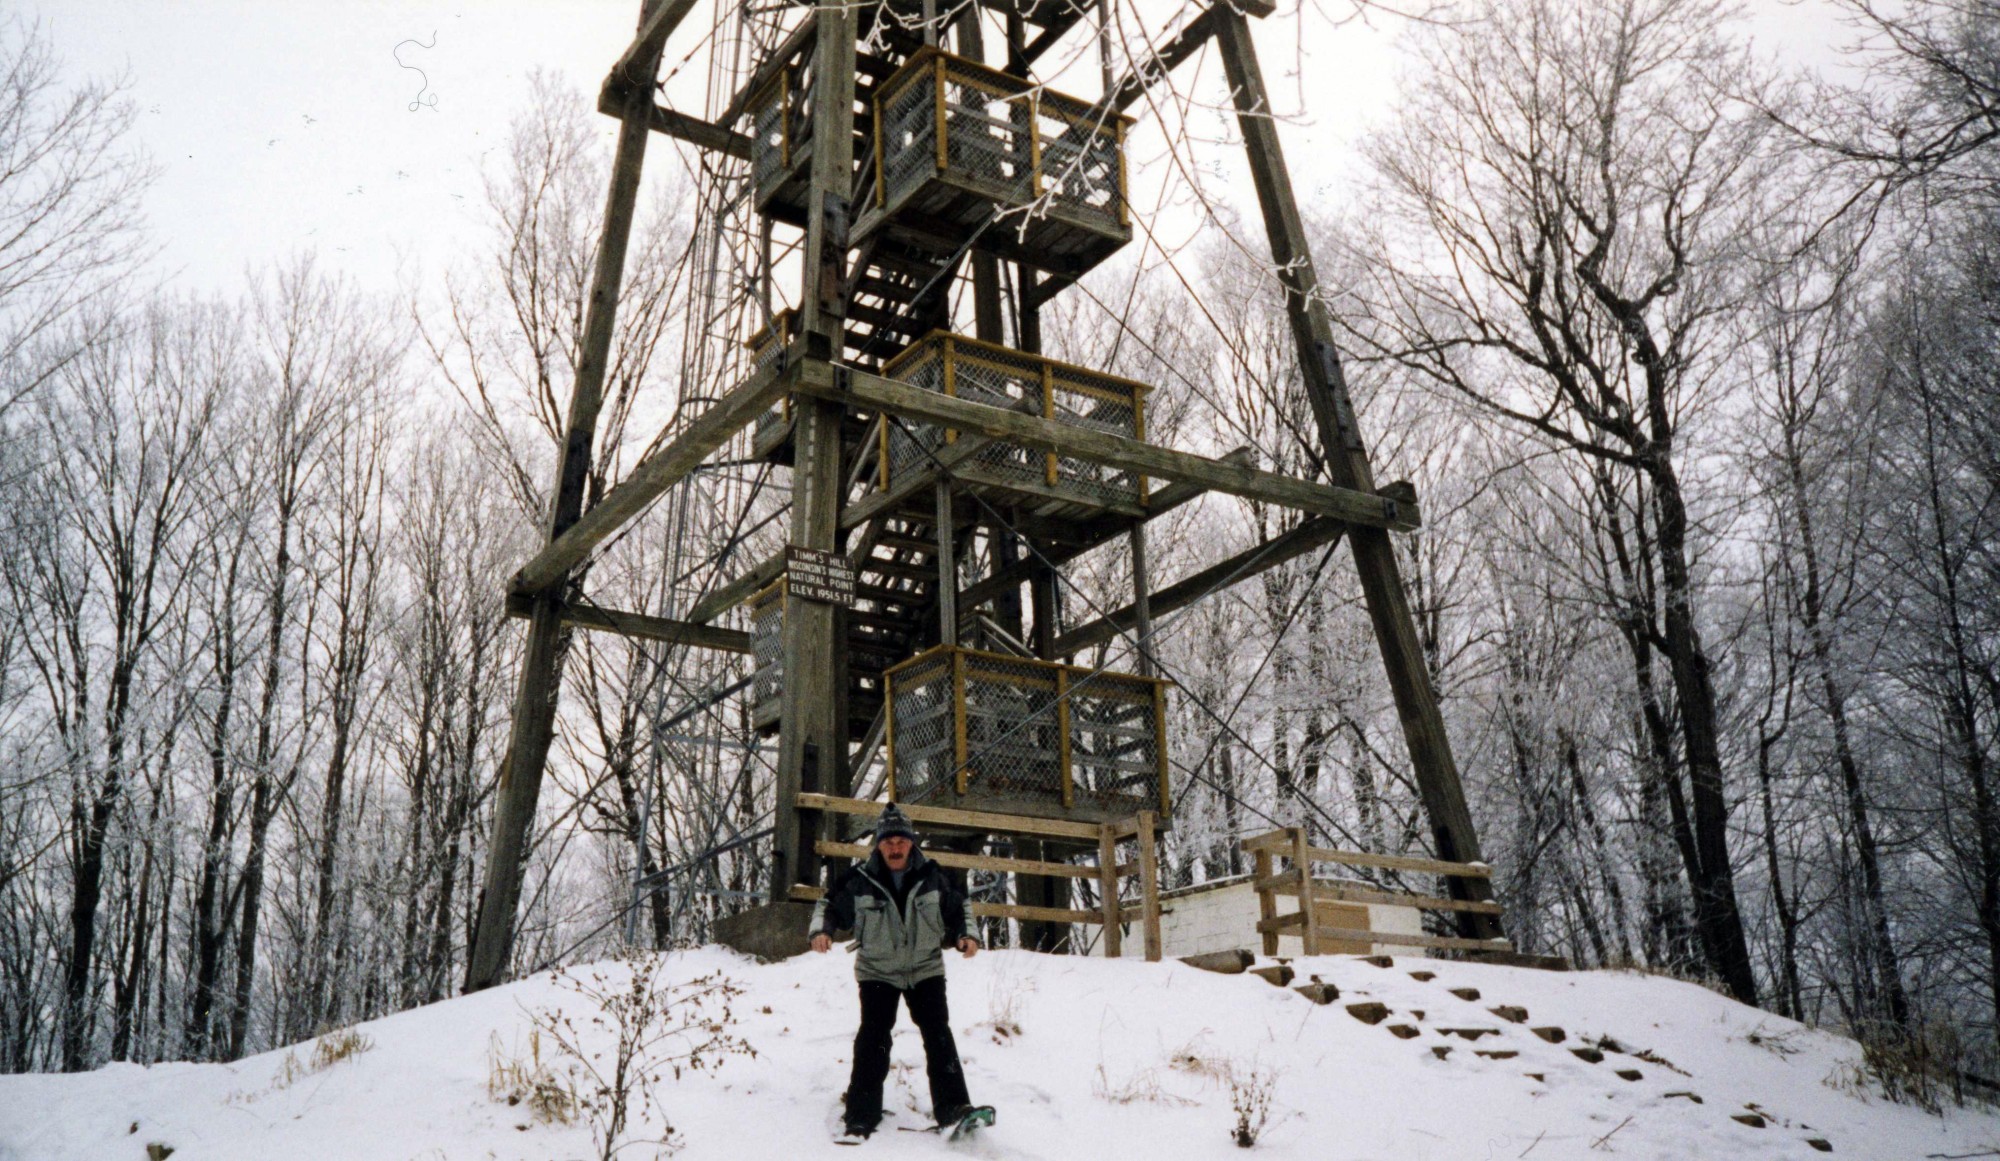 Timms Hill Tower- north central Wisconsin, snowshoeing in Midwest